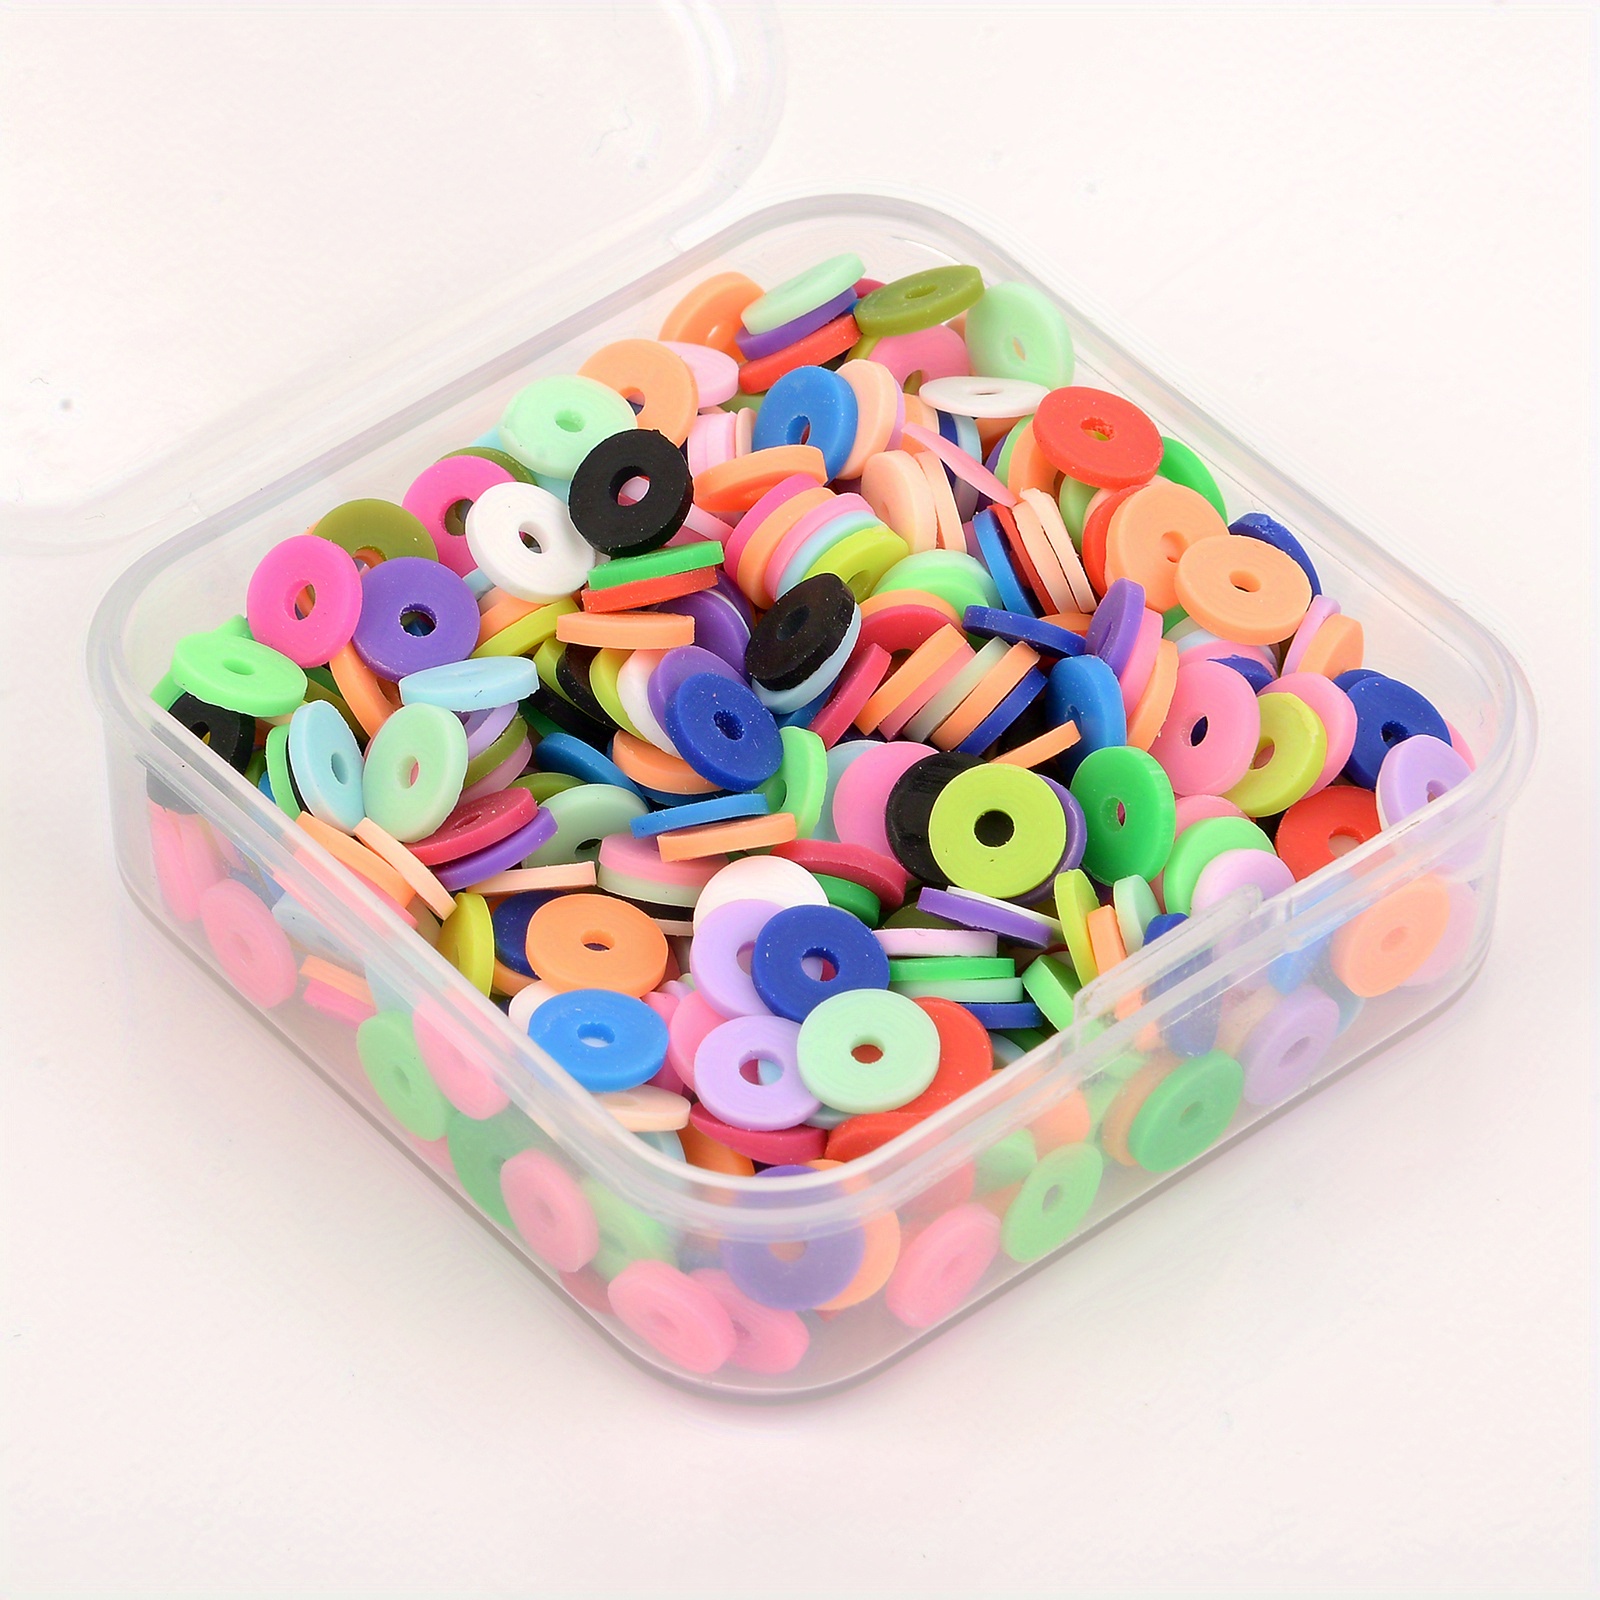 Jmassyang 3200 Pieces 6mm Flat Clay Beads Heishi Beads Polymer Round Spacer  Beads Loose Spacer for Jewelry Making Bracelets Necklaces Earring Pendant